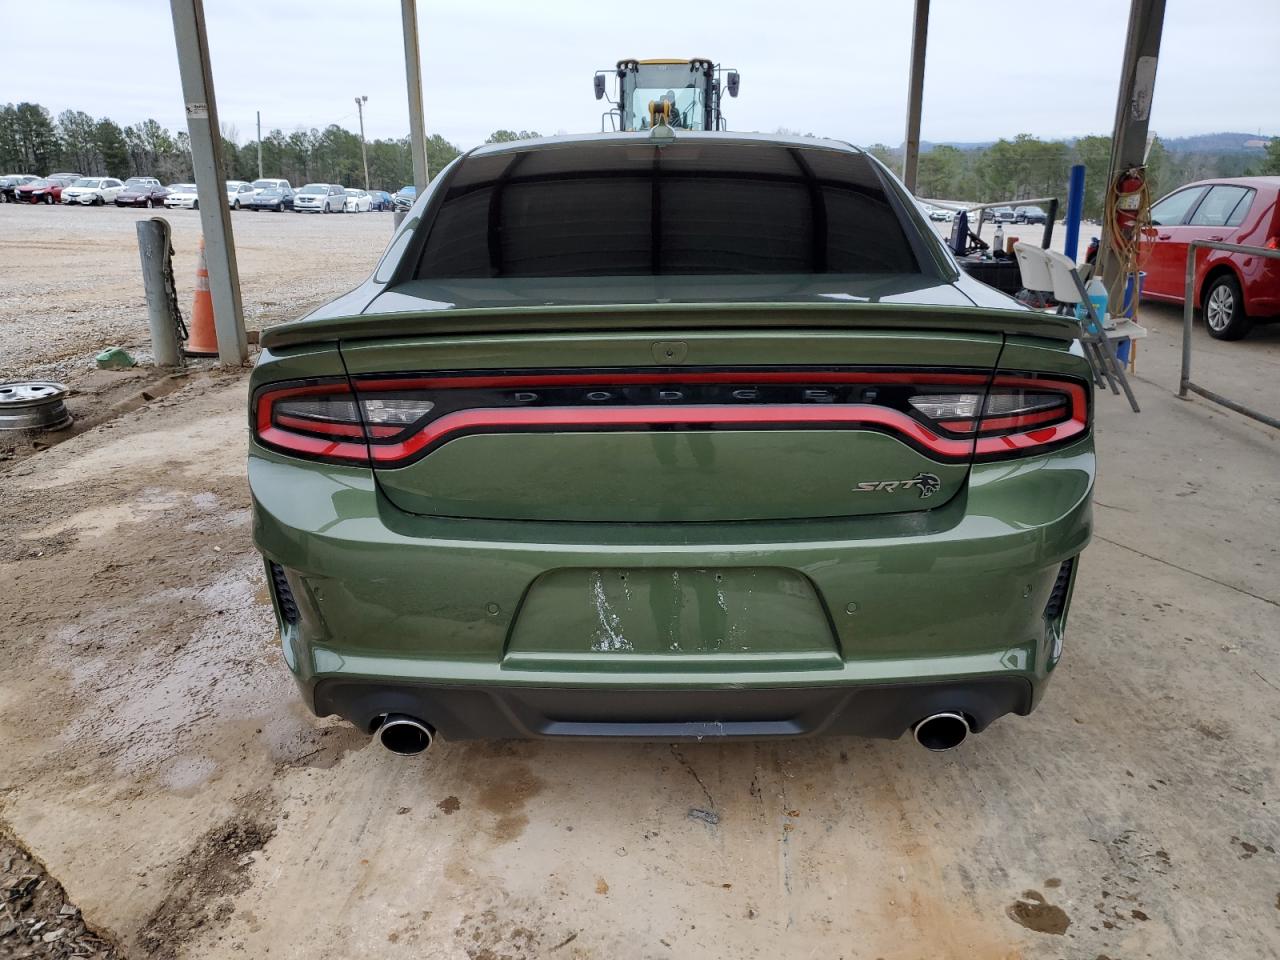 AL21AN00100****** Salvage and Repairable 2021 Dodge Charger in Alabama State